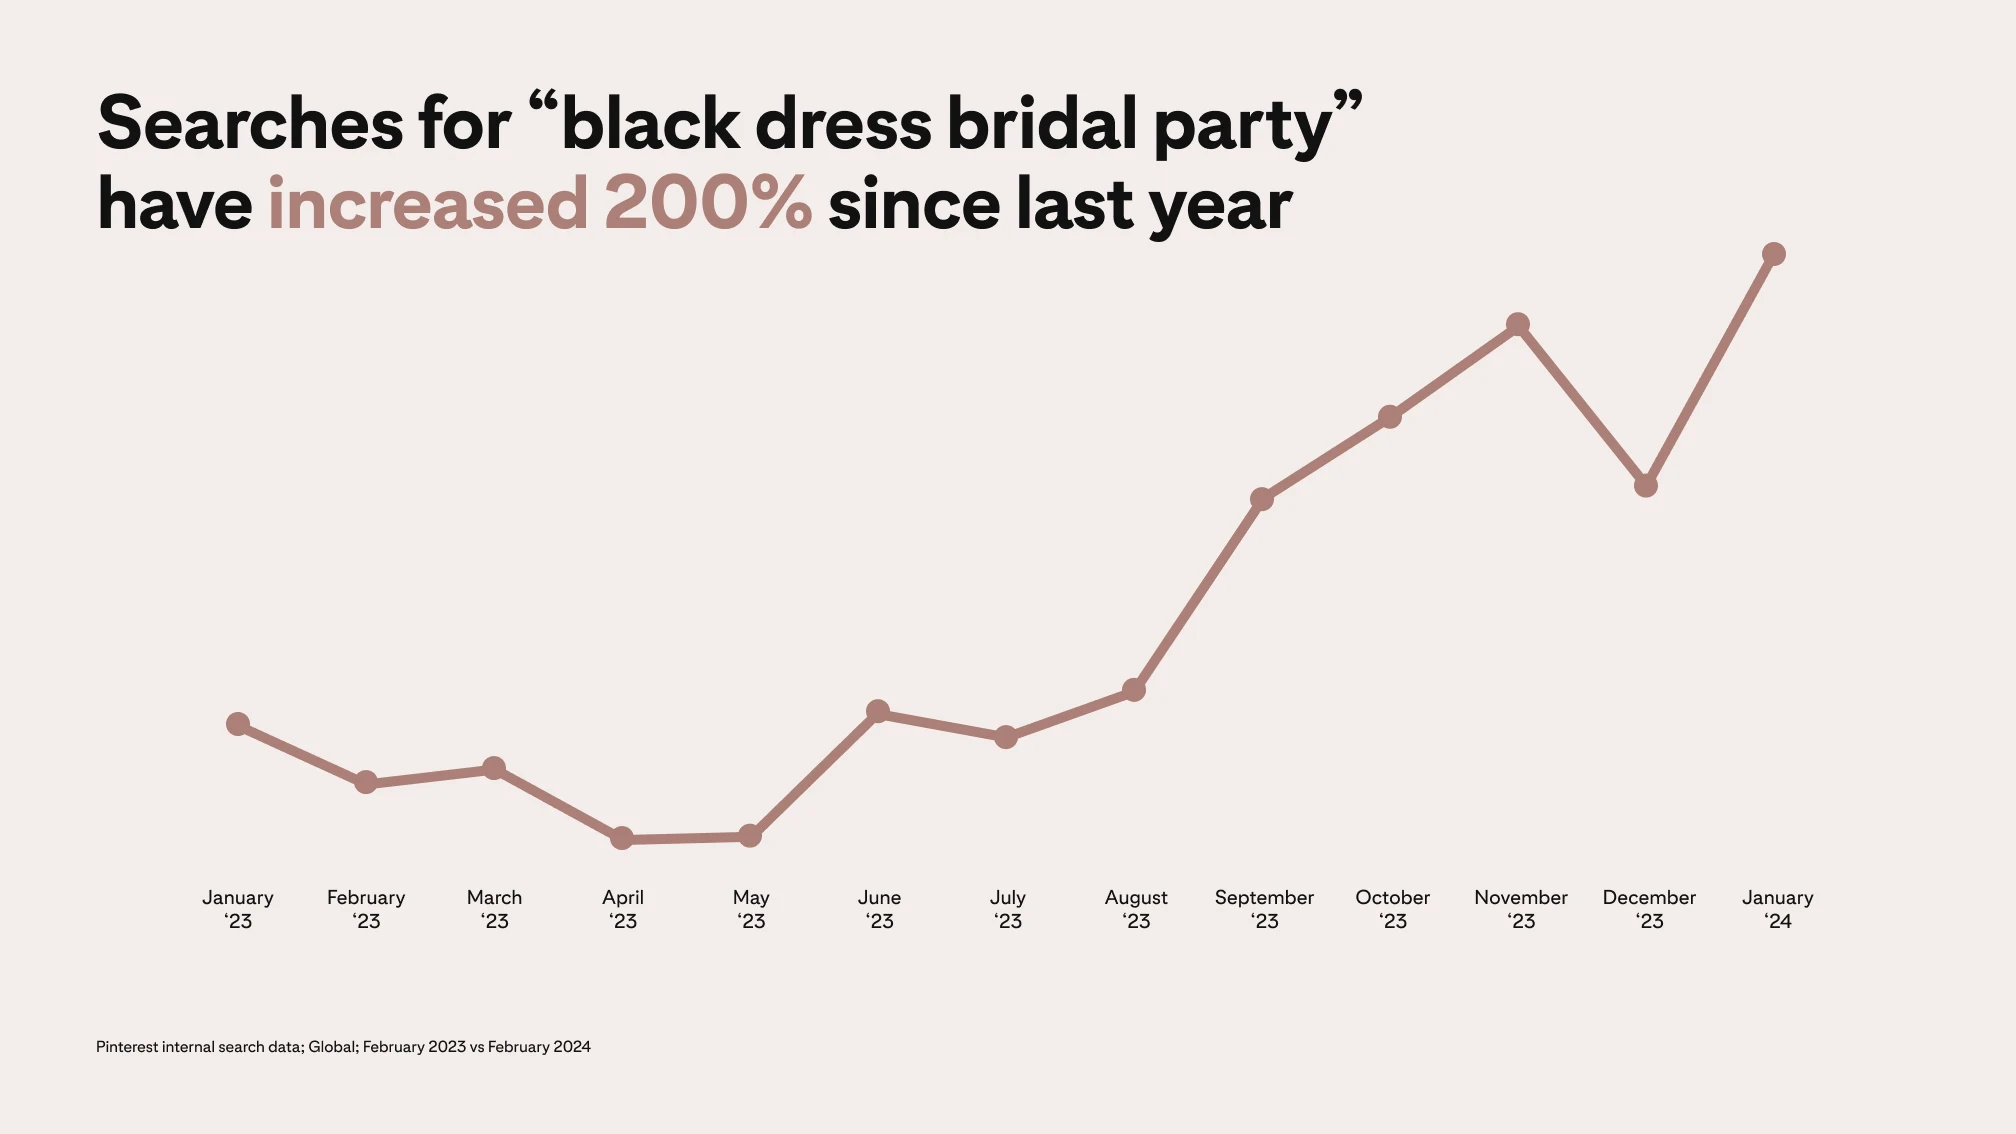 A line graph shows that Pinterest searches for "black dress bridal party" have increased 200% since last year